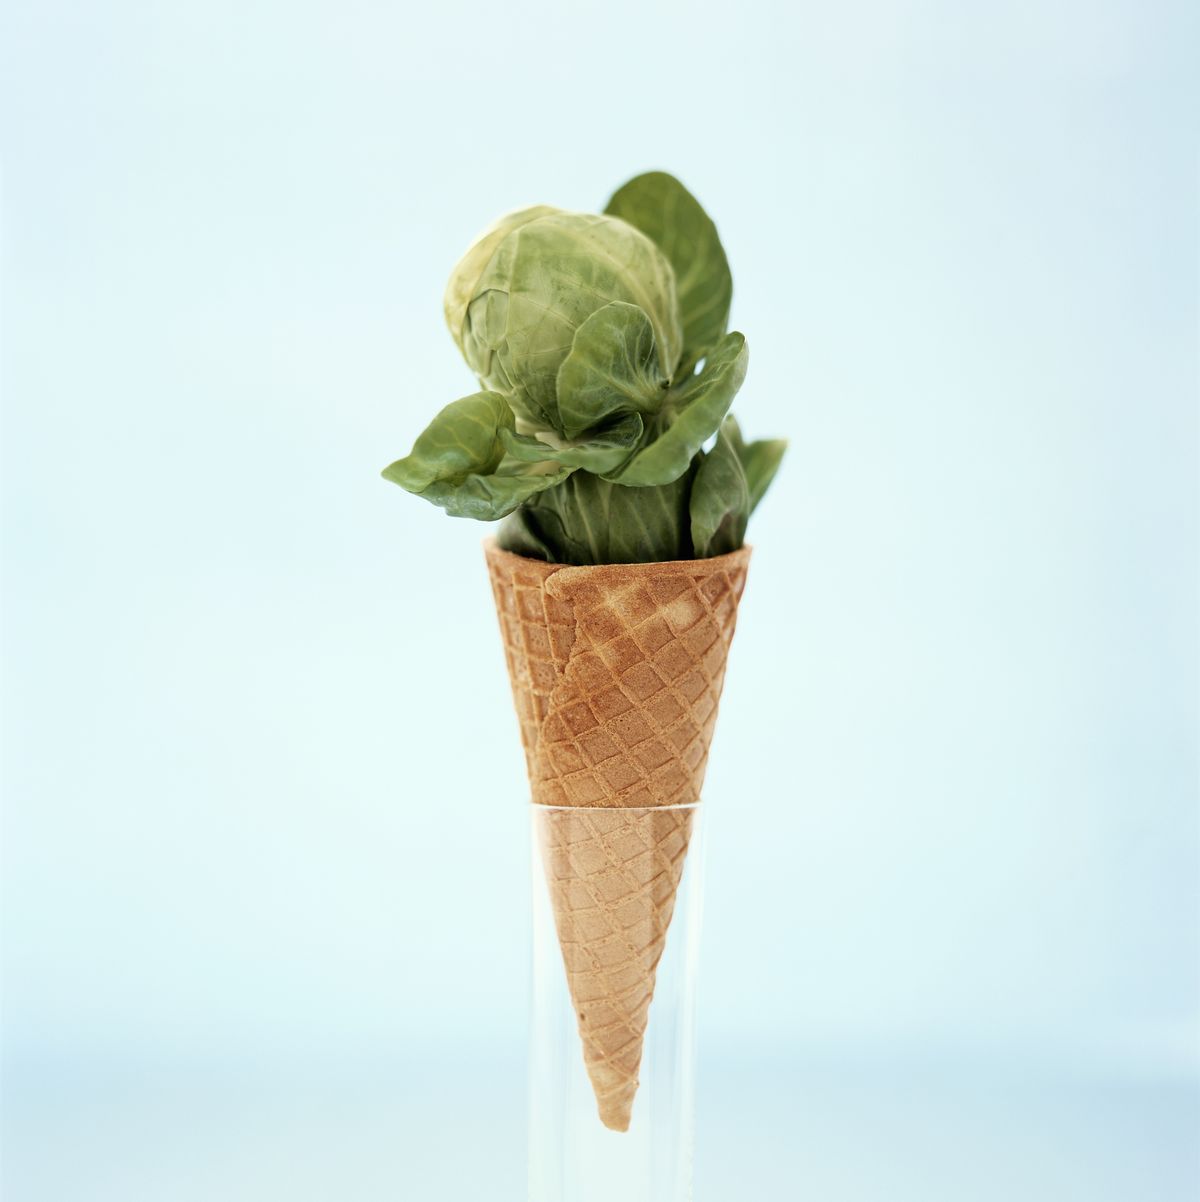 A Brussels Sprout with Greens in an Ice Cream Cone